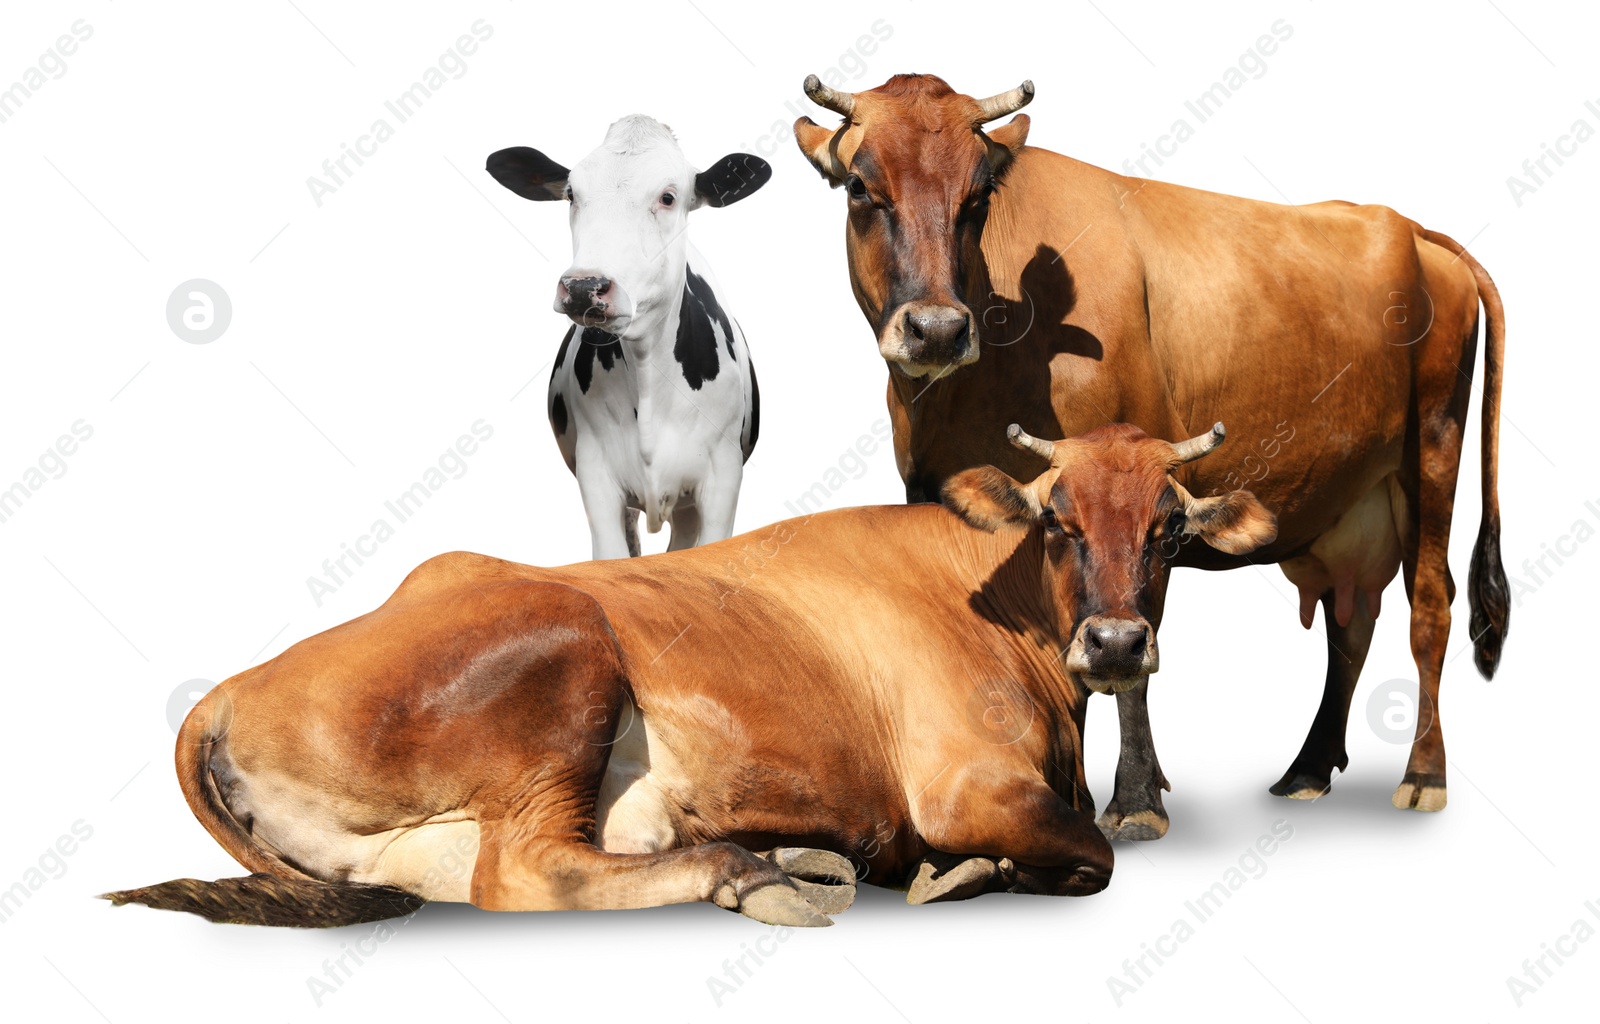 Image of Cute cows on white background. Animal husbandry